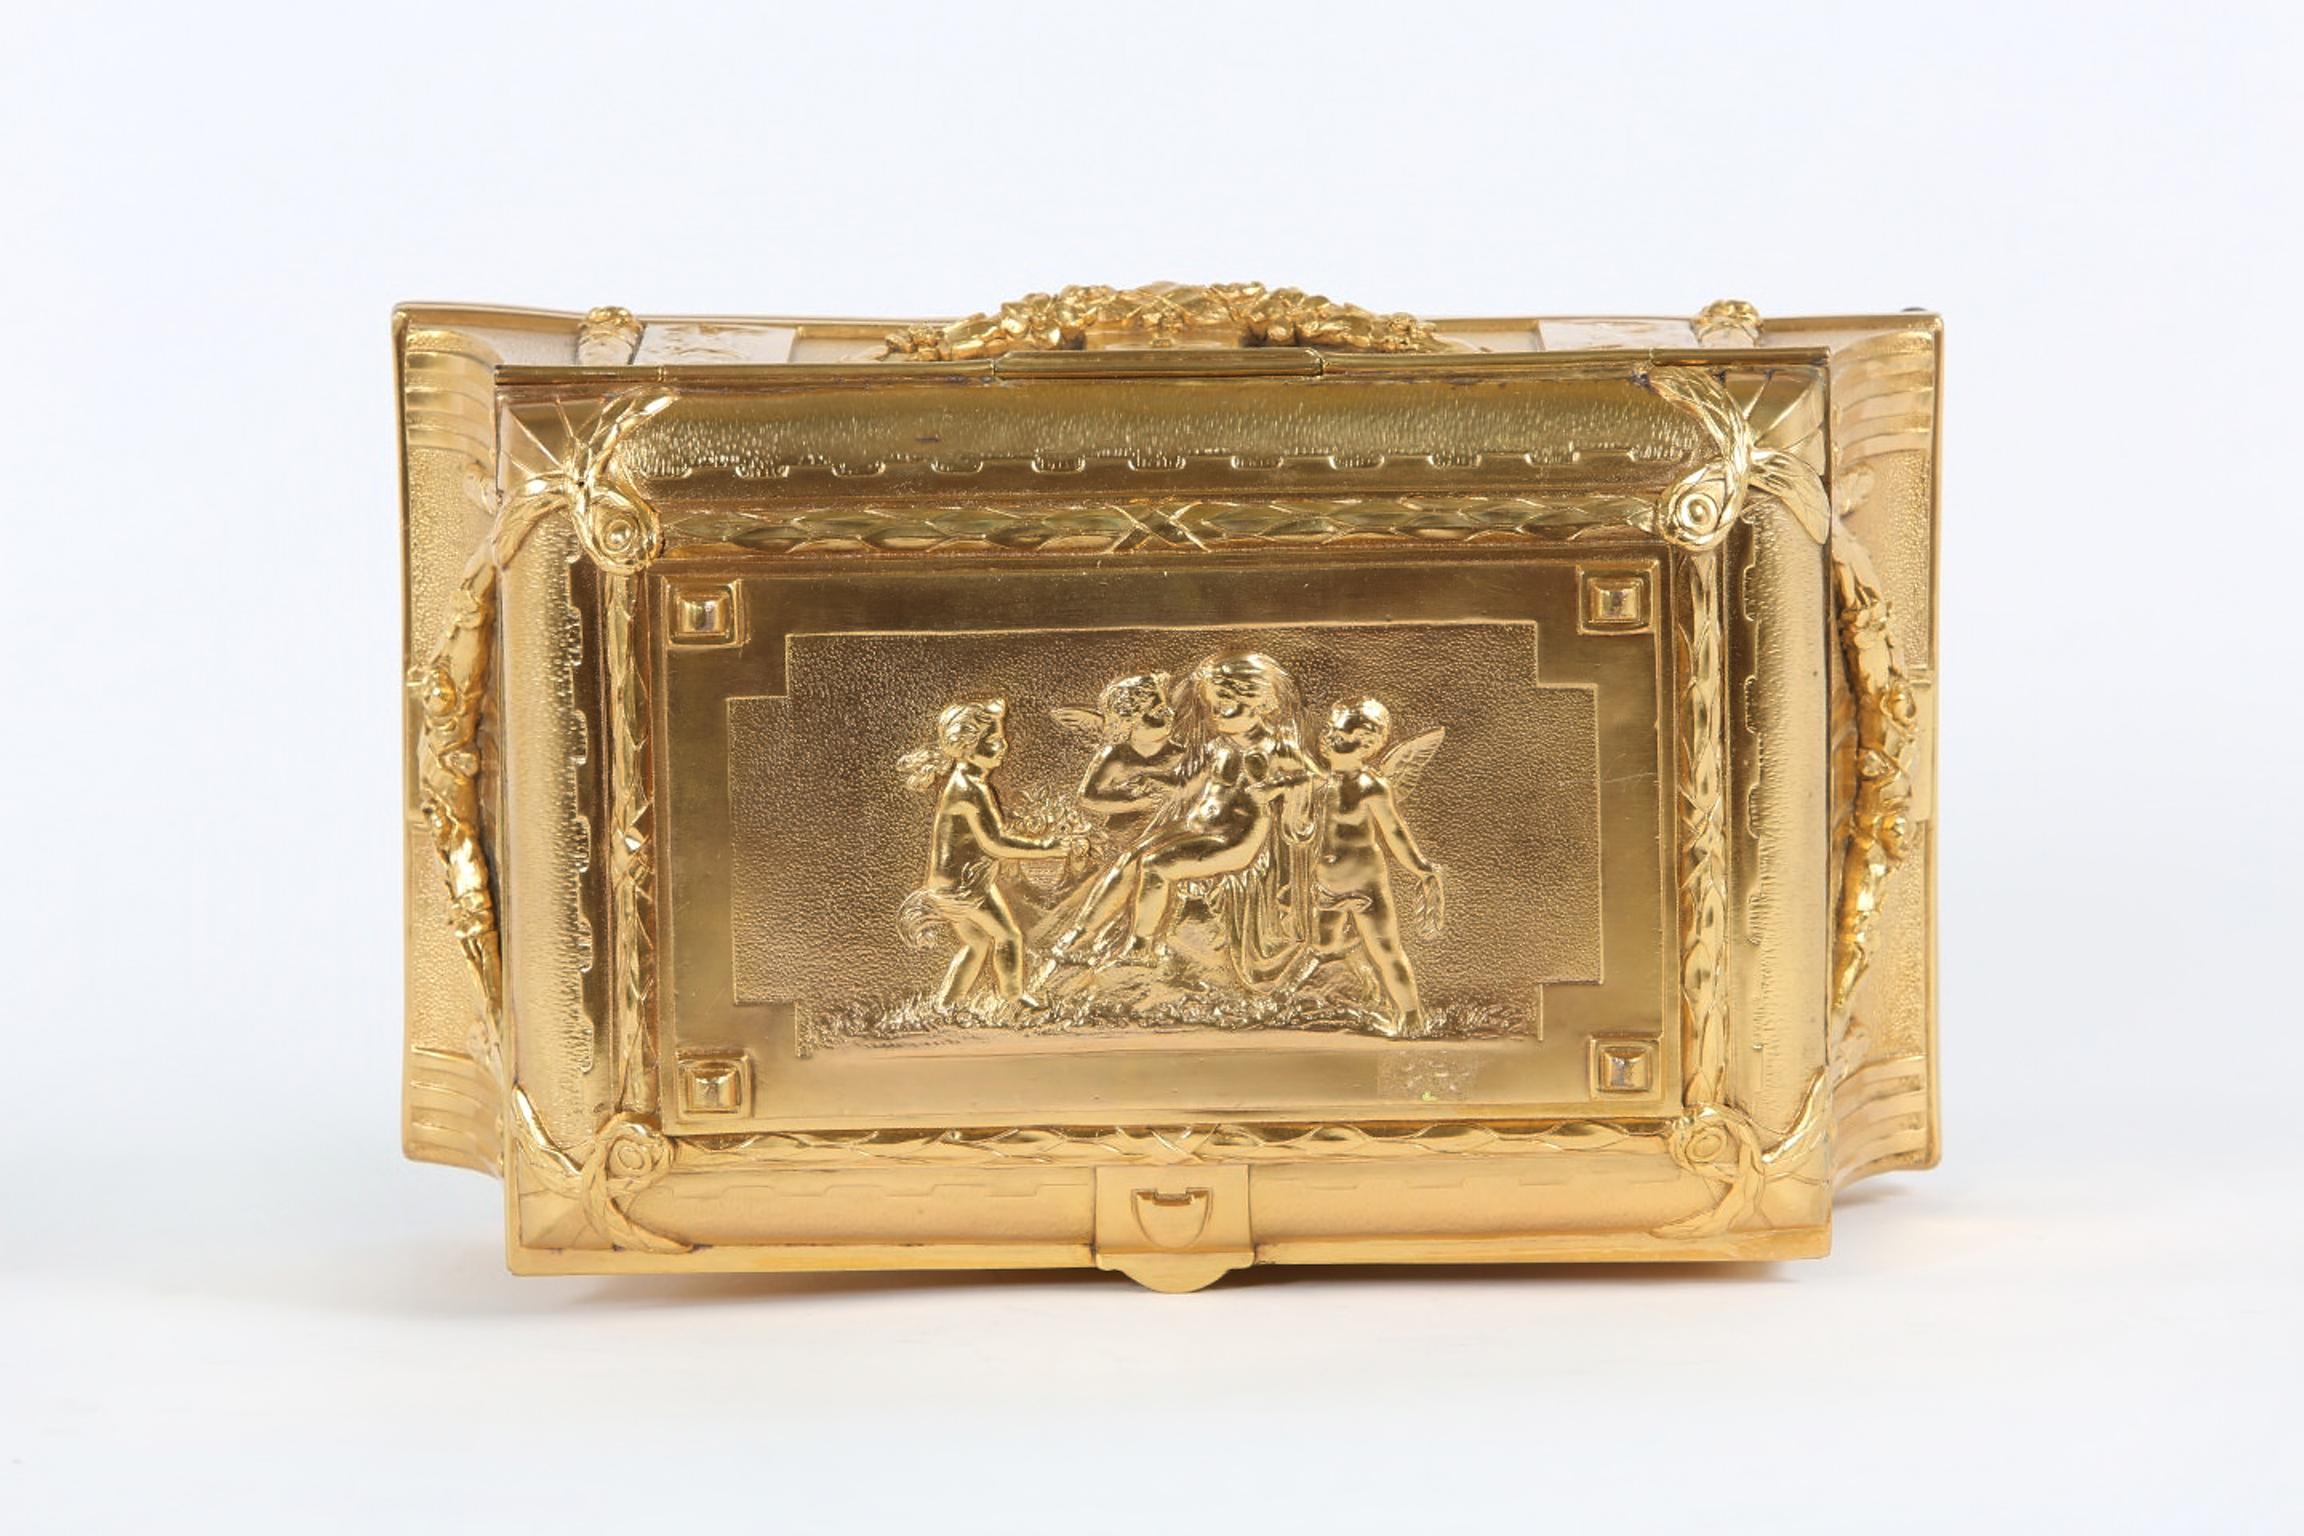 Gilt doré bronze metal footed covered decorated box with exterior floral swags design details and silk interior. Front standing beauties and top cover depiction of seated girl surrounded by putti. Regilded & maker's mark stamped undersigned with